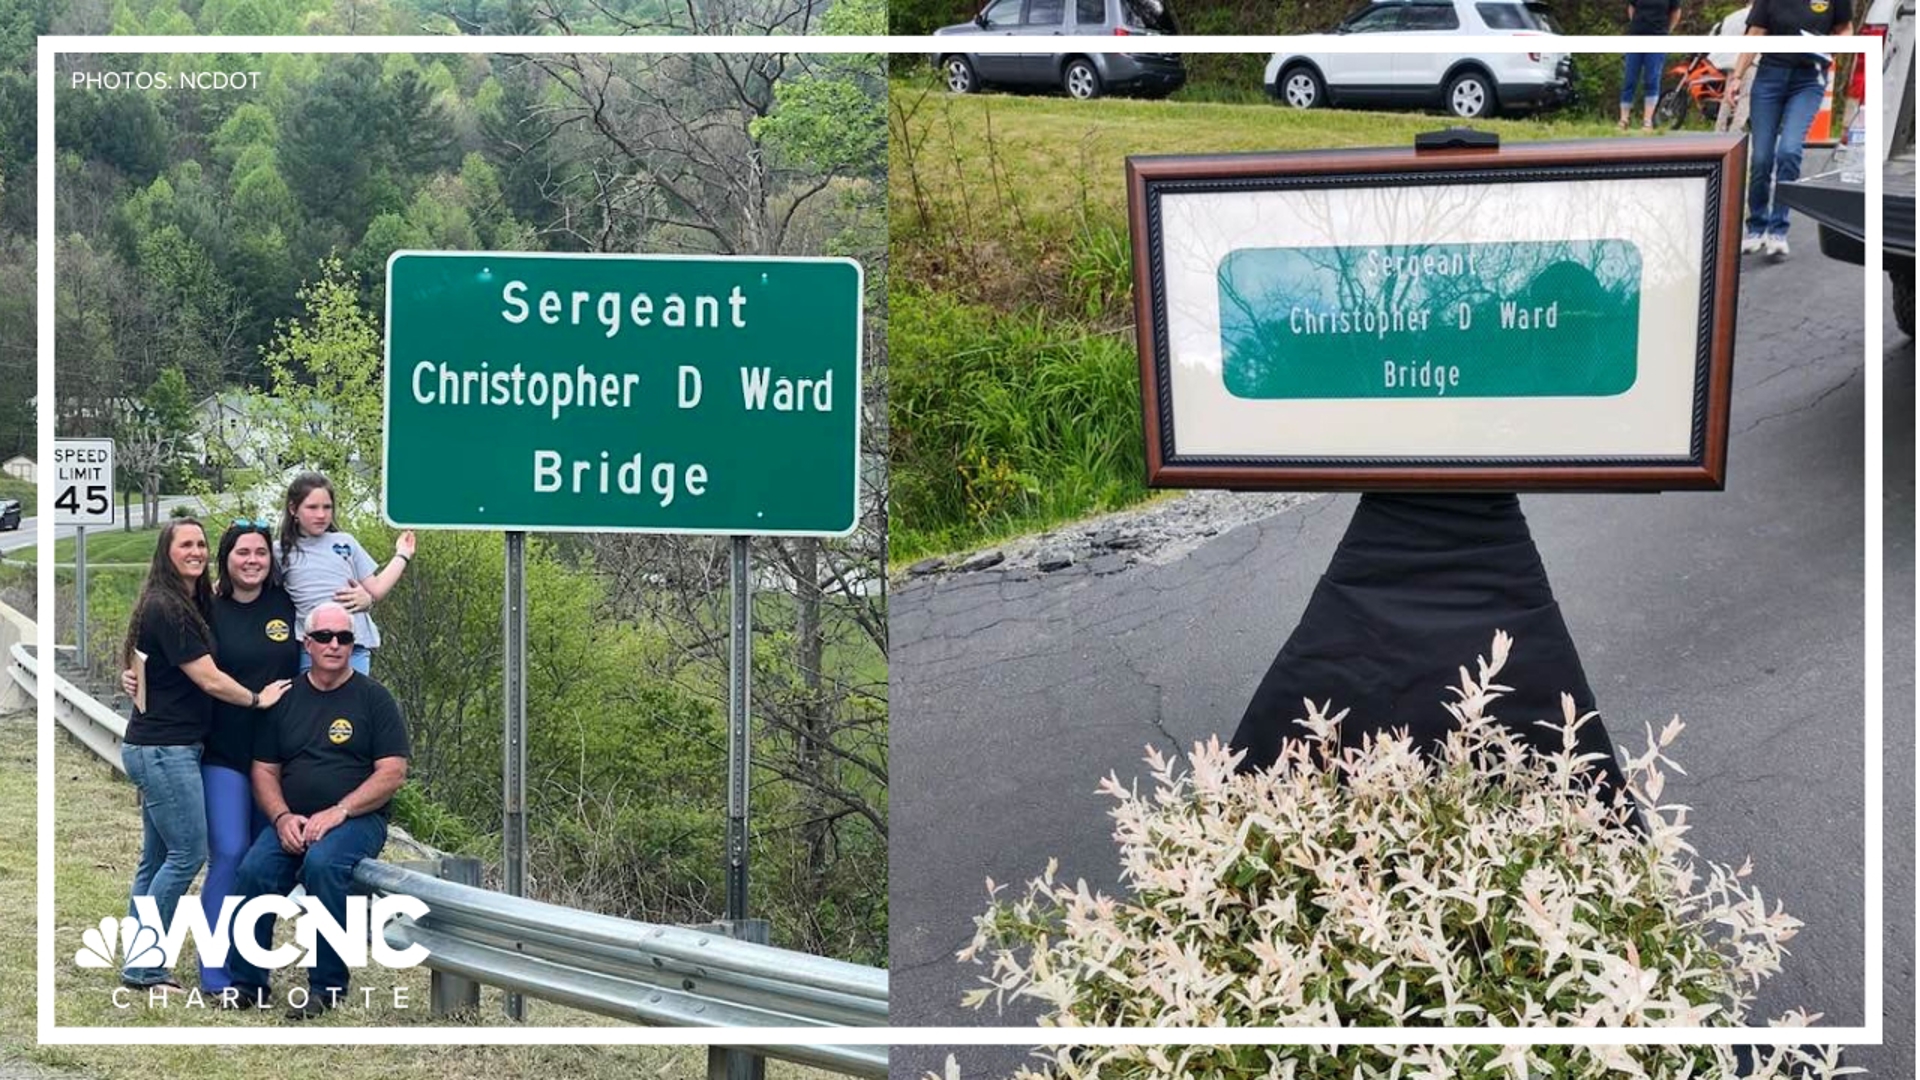 Sgt. Chris Ward was shot and killed during a welfare check that turned into an hours-long standoff in Boone in 2021.